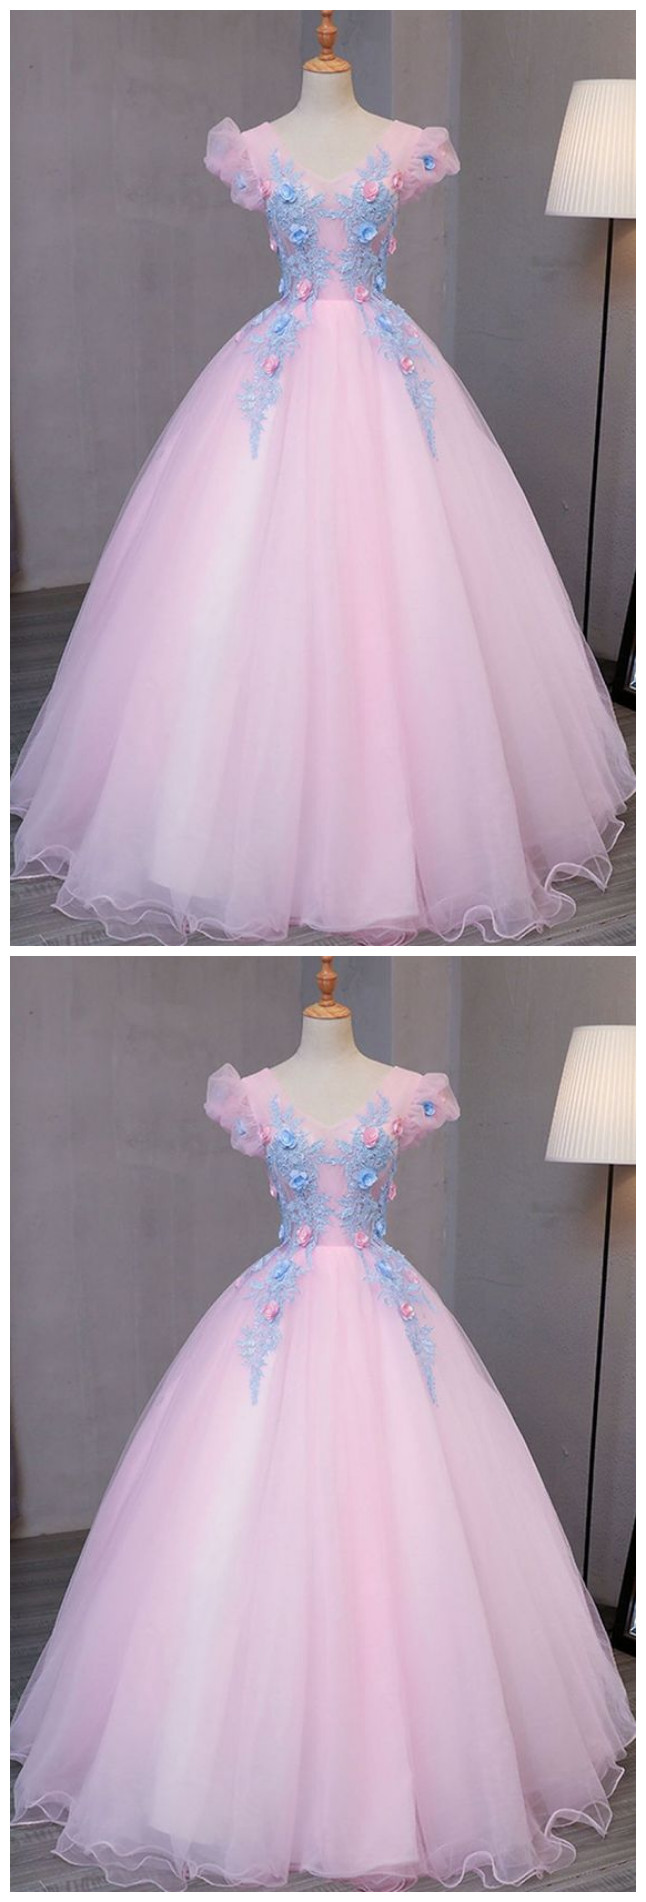 Special Pink Tulle V Neck Long Prom Gown With Blue Flower Lace Appliqués